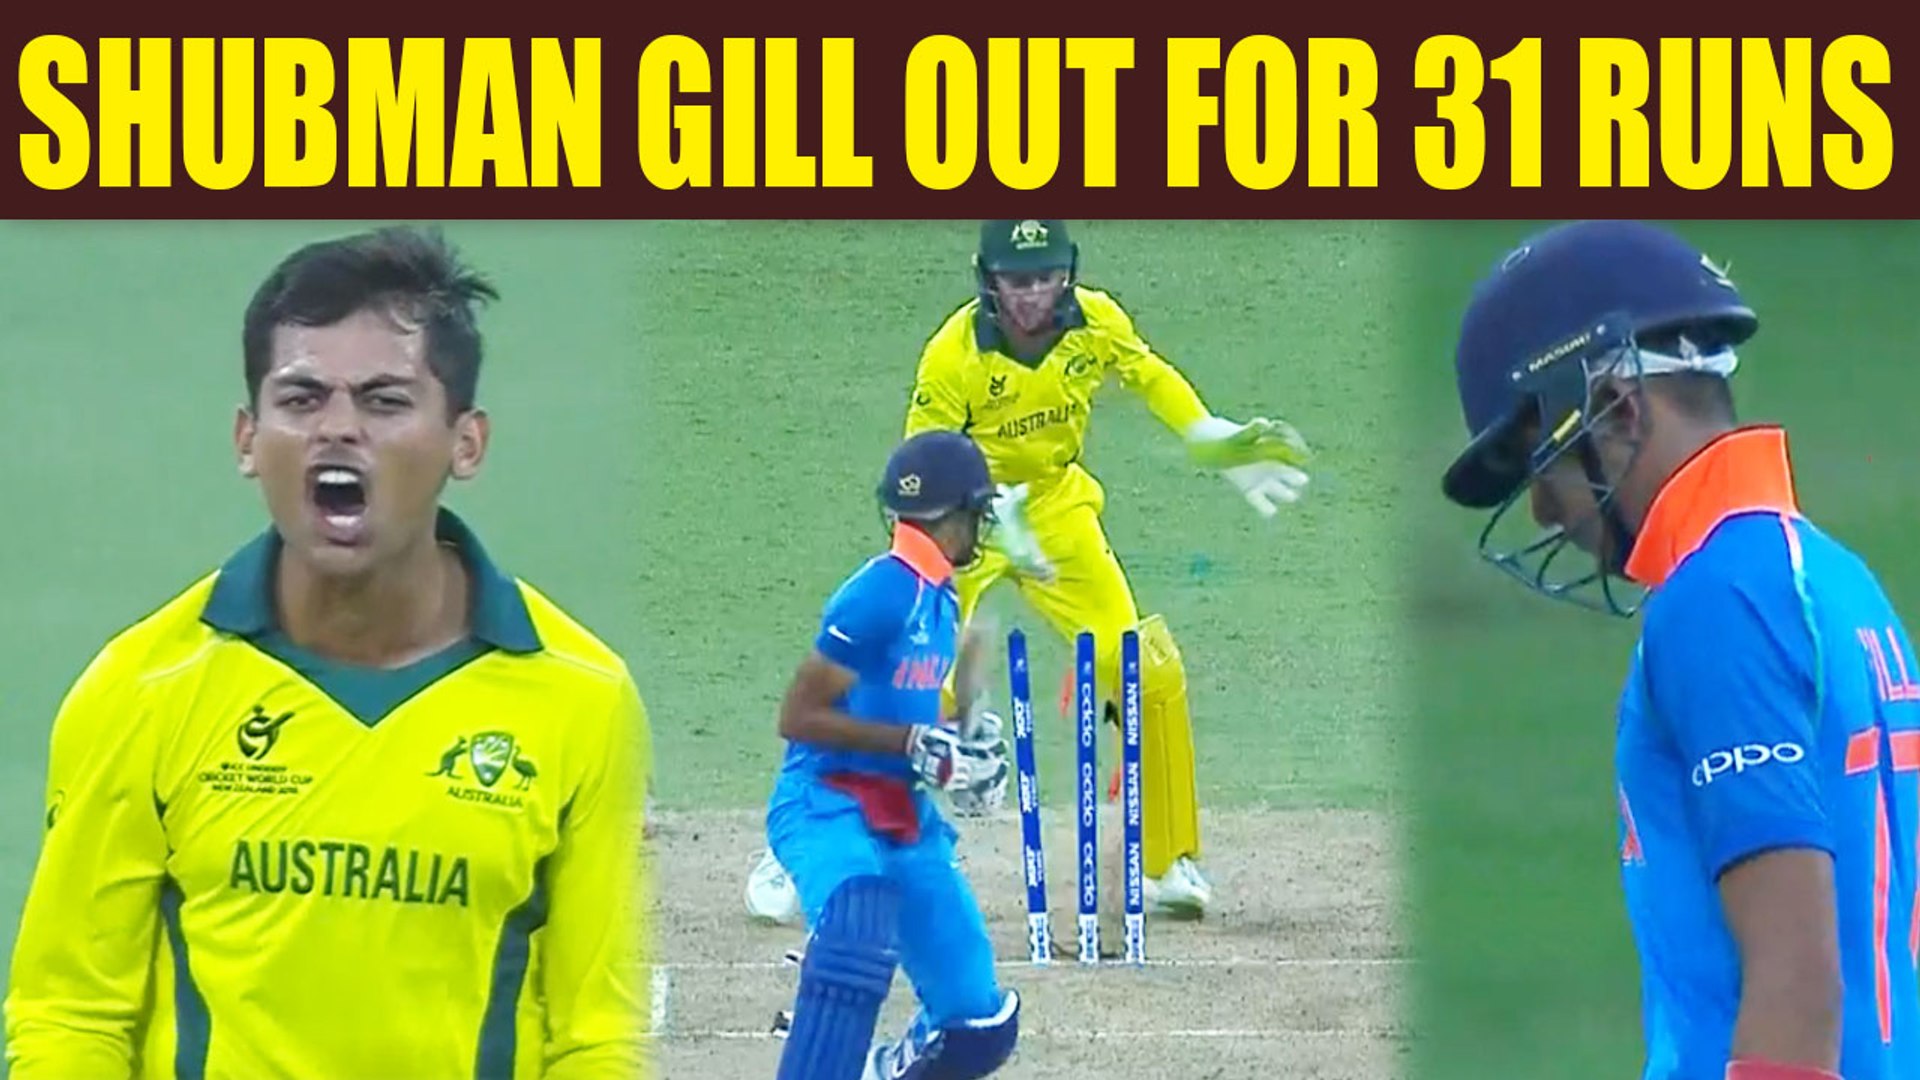 India Vs Australia U19 Wc Shubman Gill Dismissed For 31 Runs India Loses 2nd Wicket Oneindia News Video Dailymotion